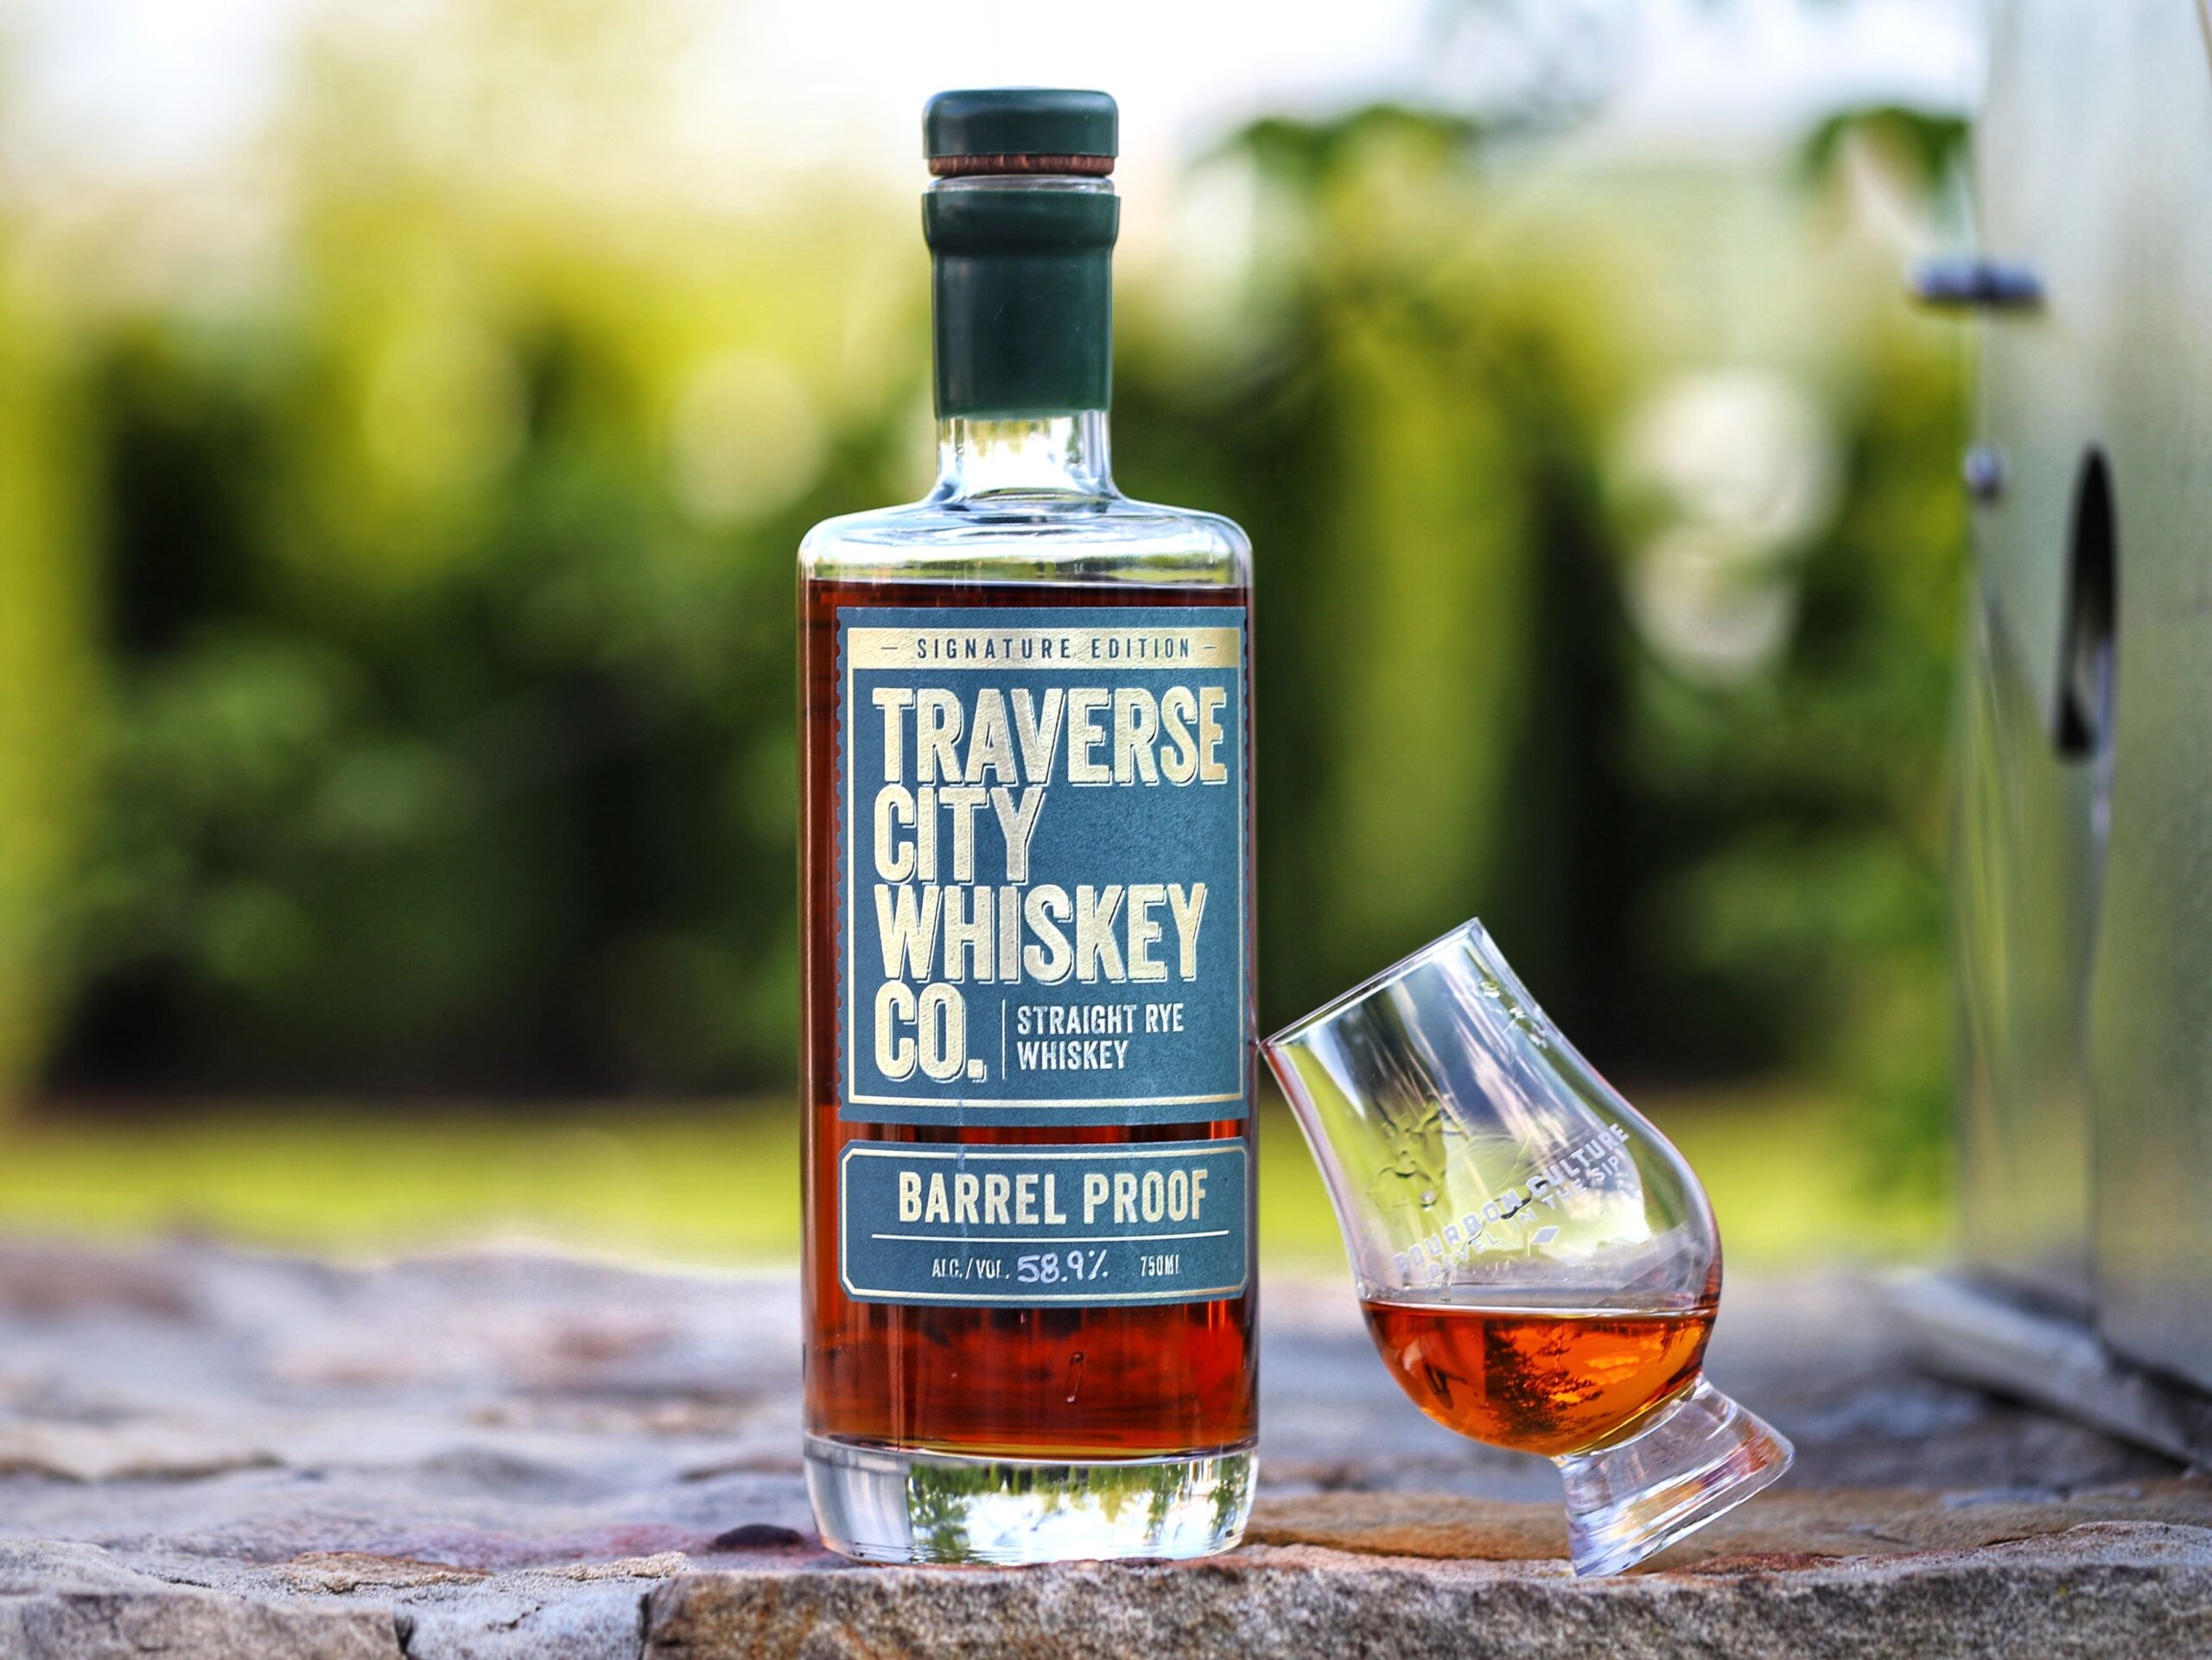 Traverse City Barrel Proof Rye Whiskey Review